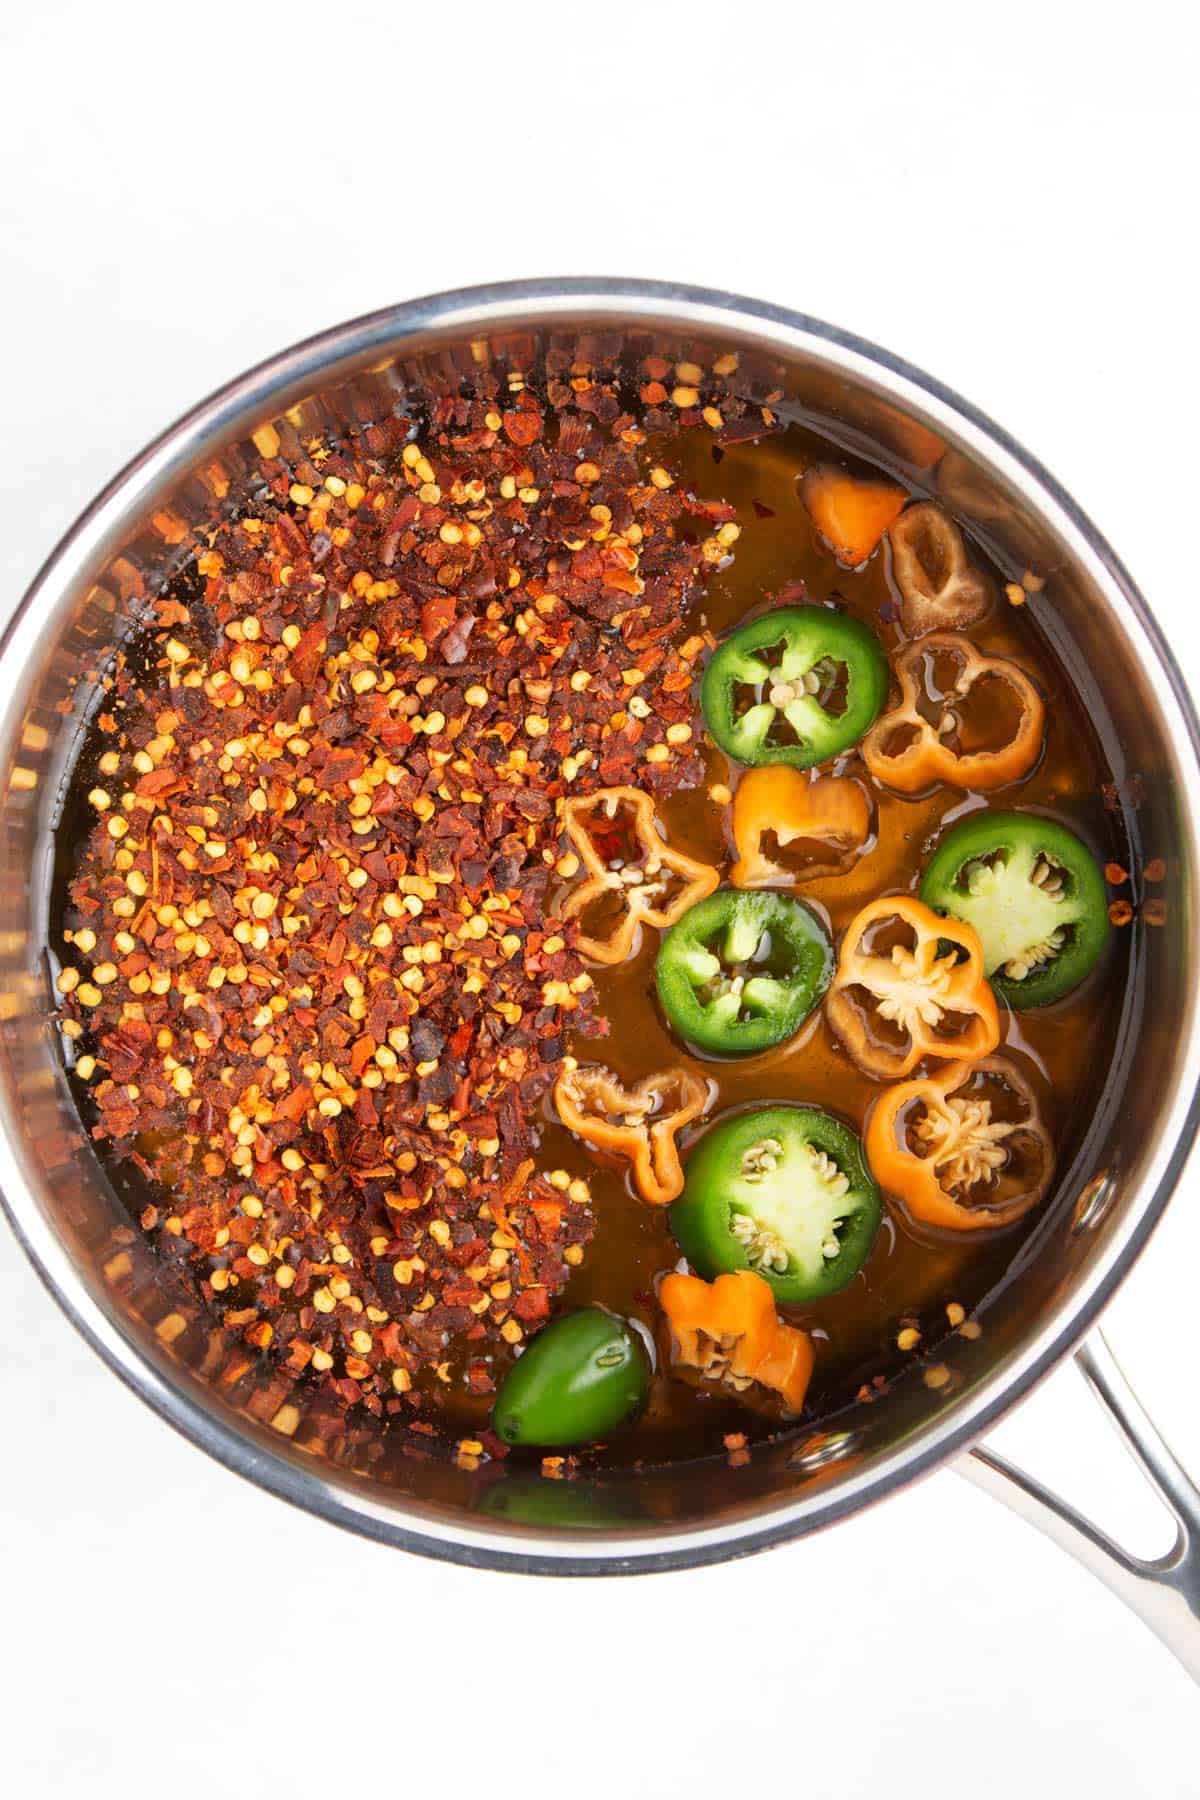 Overhead view of a silver saucepan with honey, pepper flakes, habaneros, and jalapenos inside.